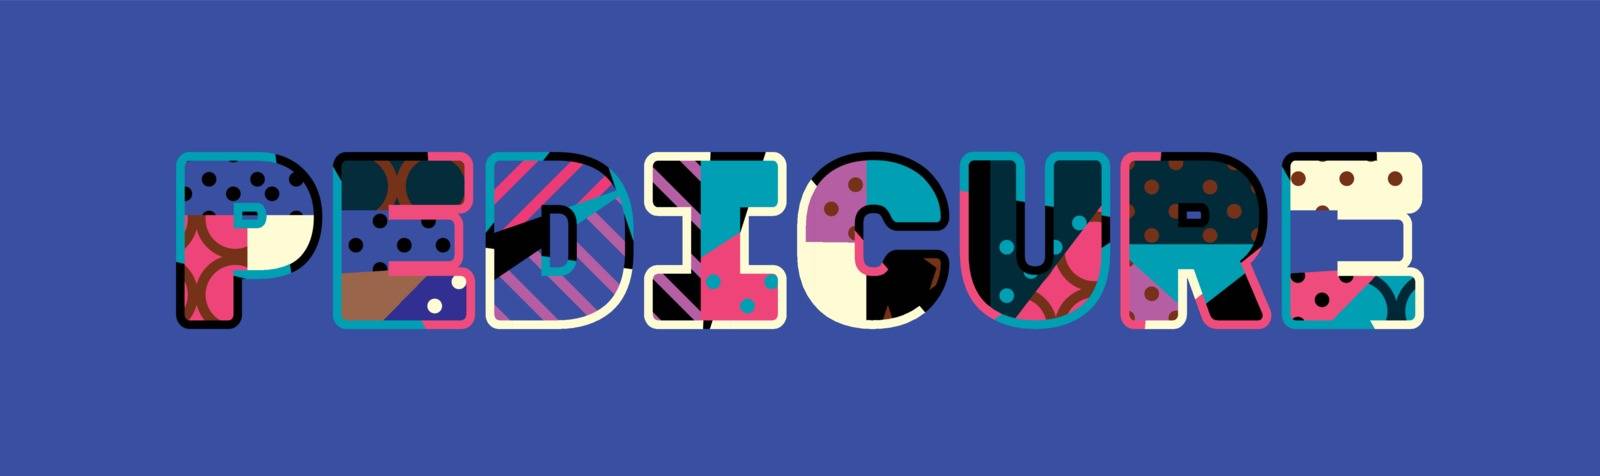 The word PEDICURE concept written in colorful abstract typography. Vector EPS 10 available.